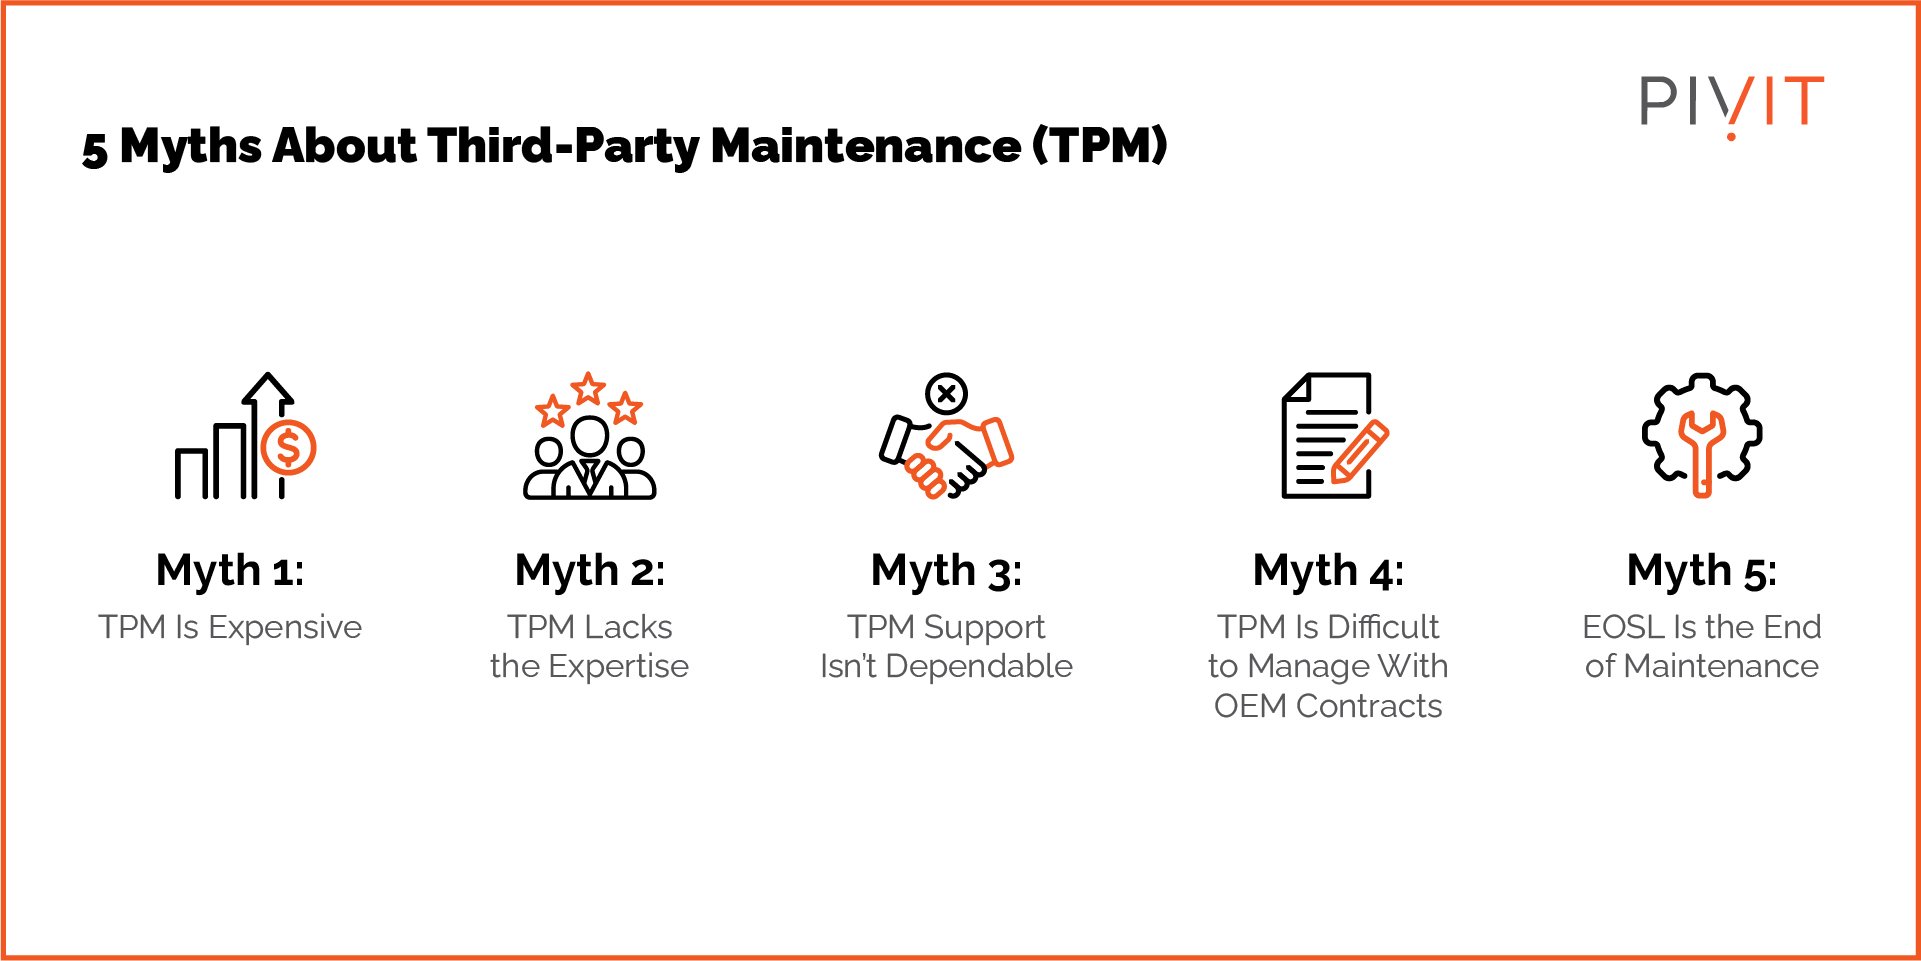 5 myths about third-party maintenance